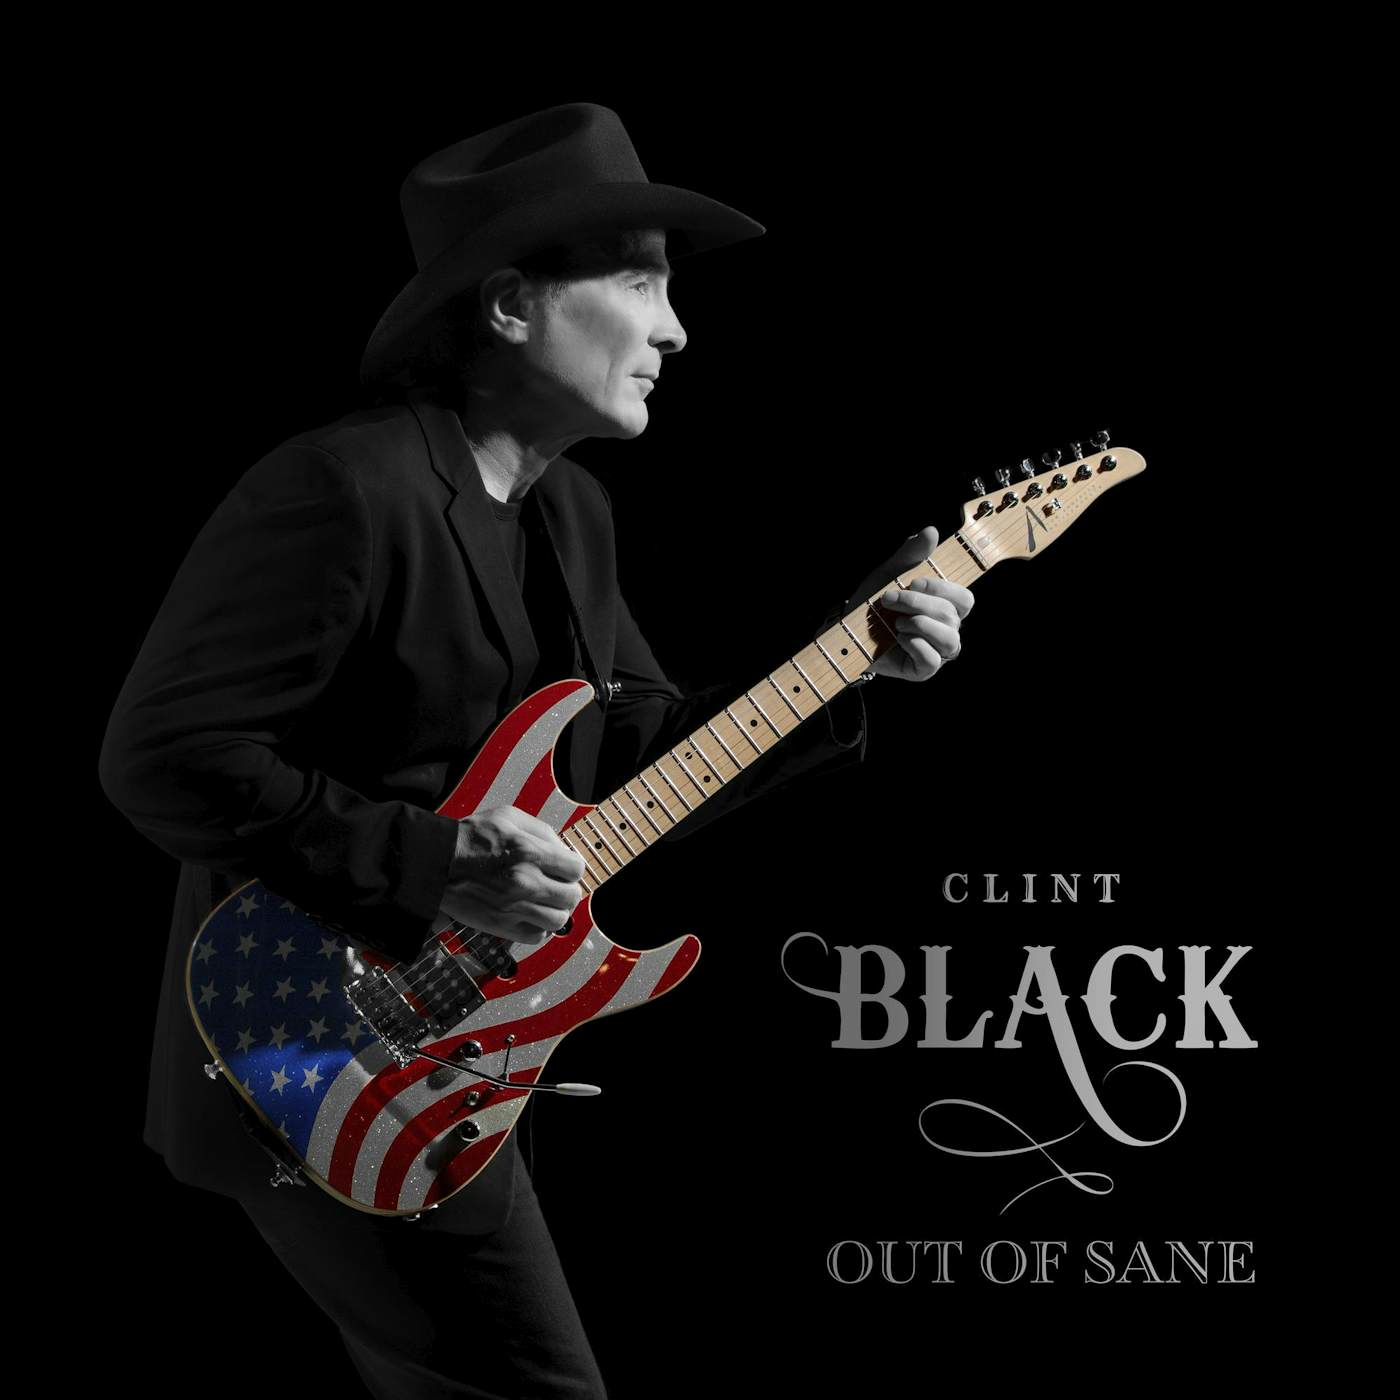 Clint Black Out of Sane Vinyl Record